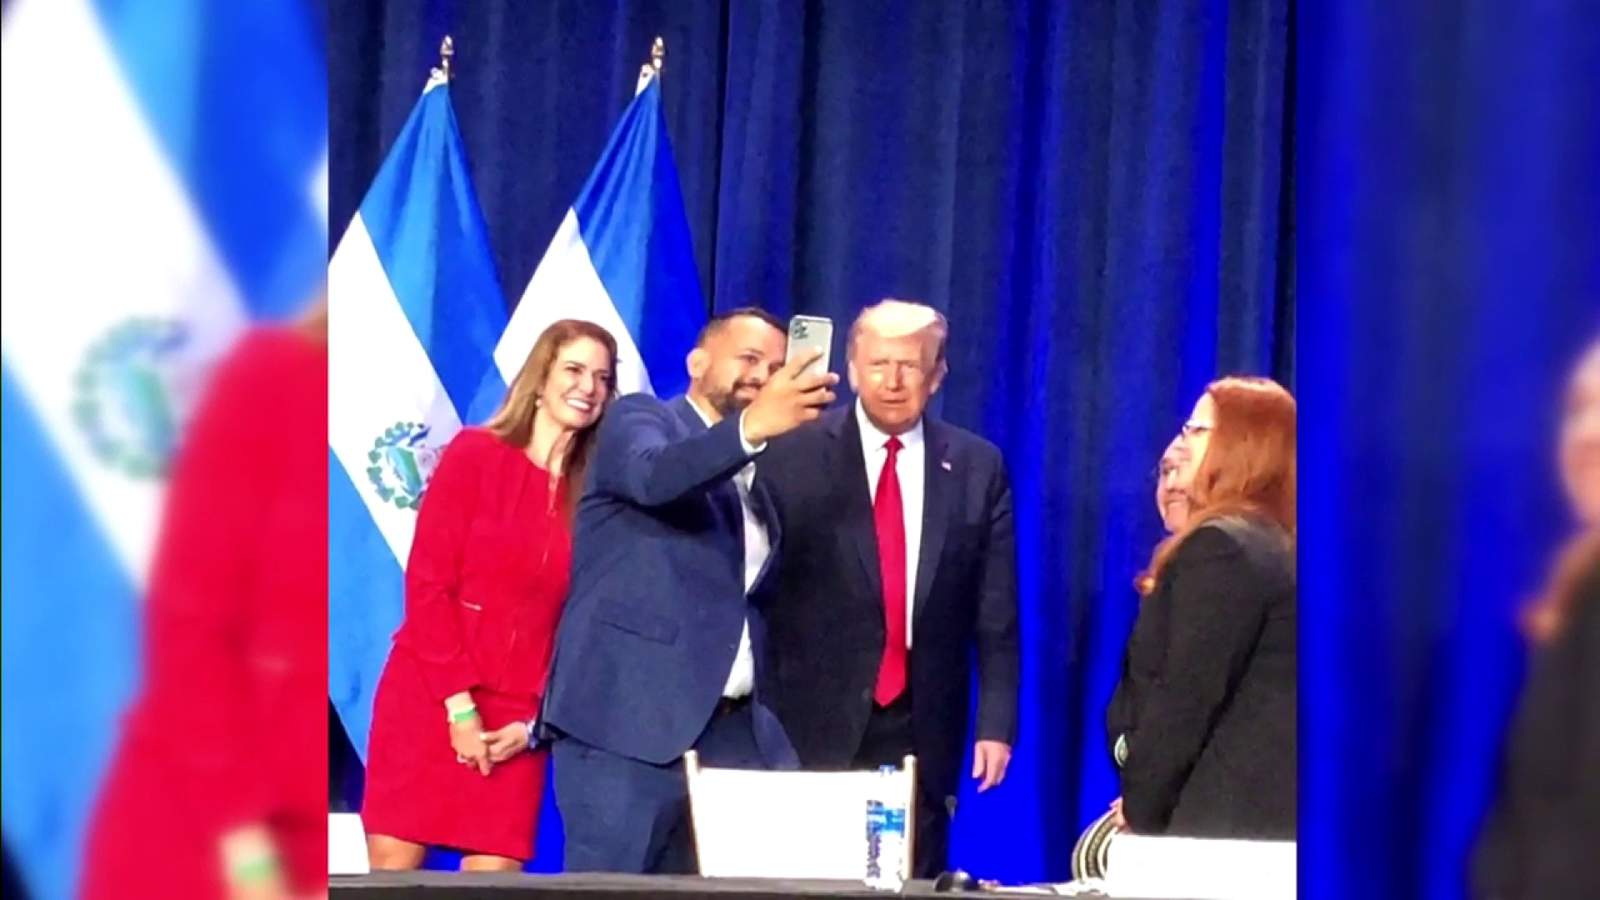 President hosted large event in Miami a week before testing positive for COVID-19